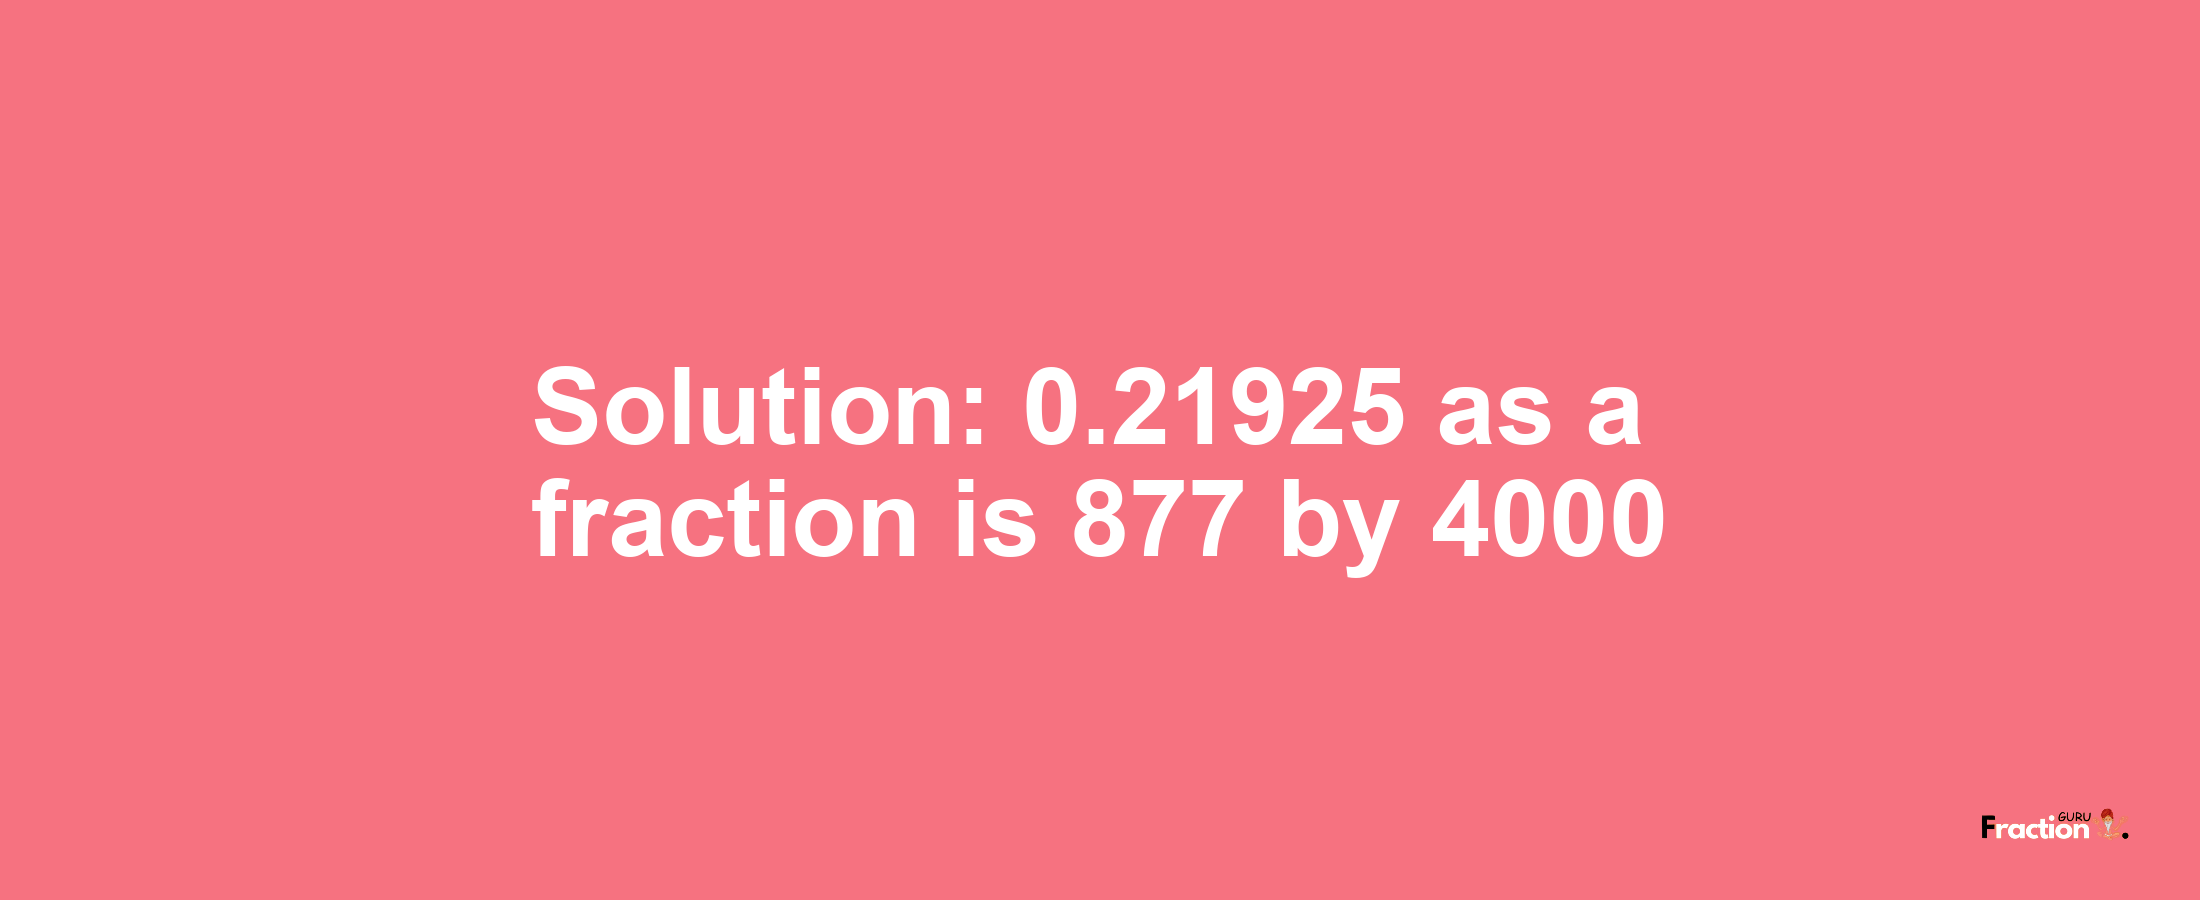 Solution:0.21925 as a fraction is 877/4000